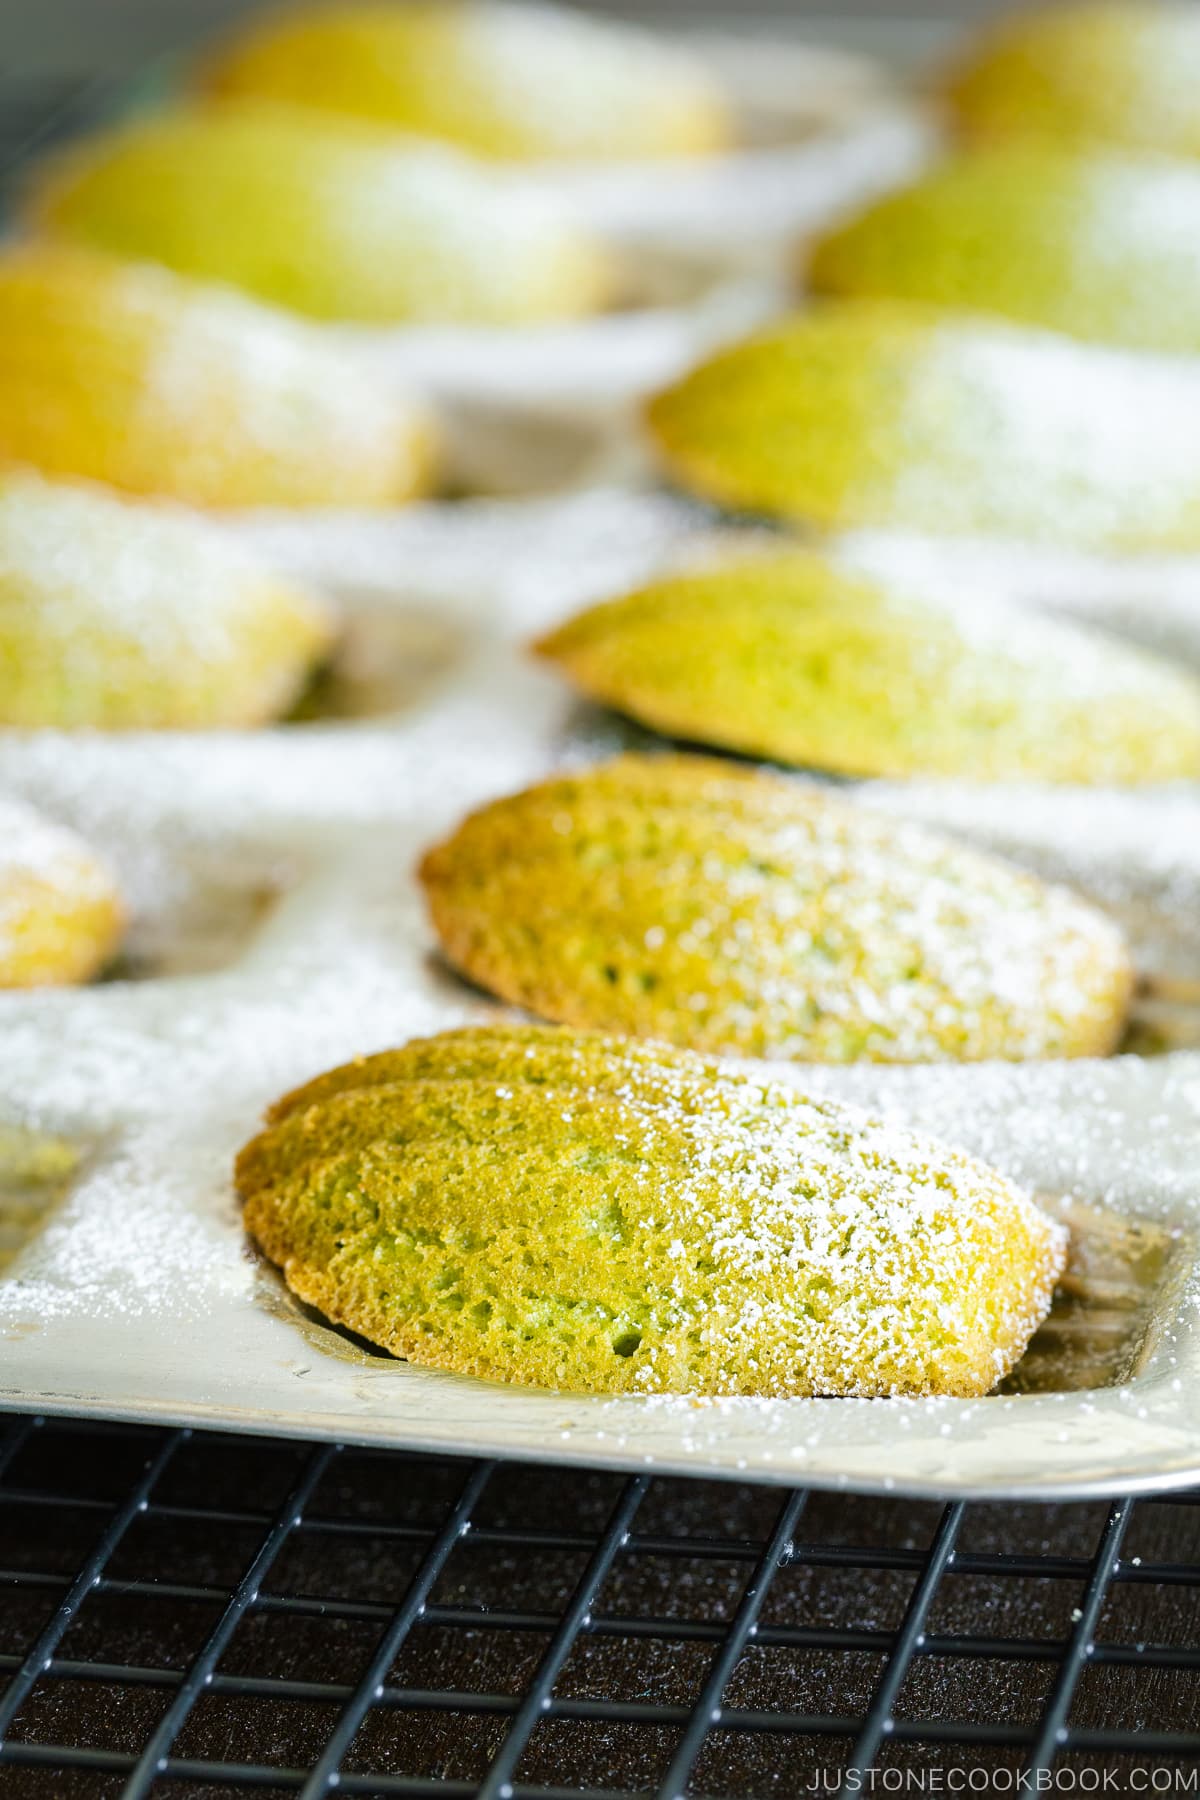 A Madeleine pan containing matcha green tea madeleines dusted with powdered sugar.